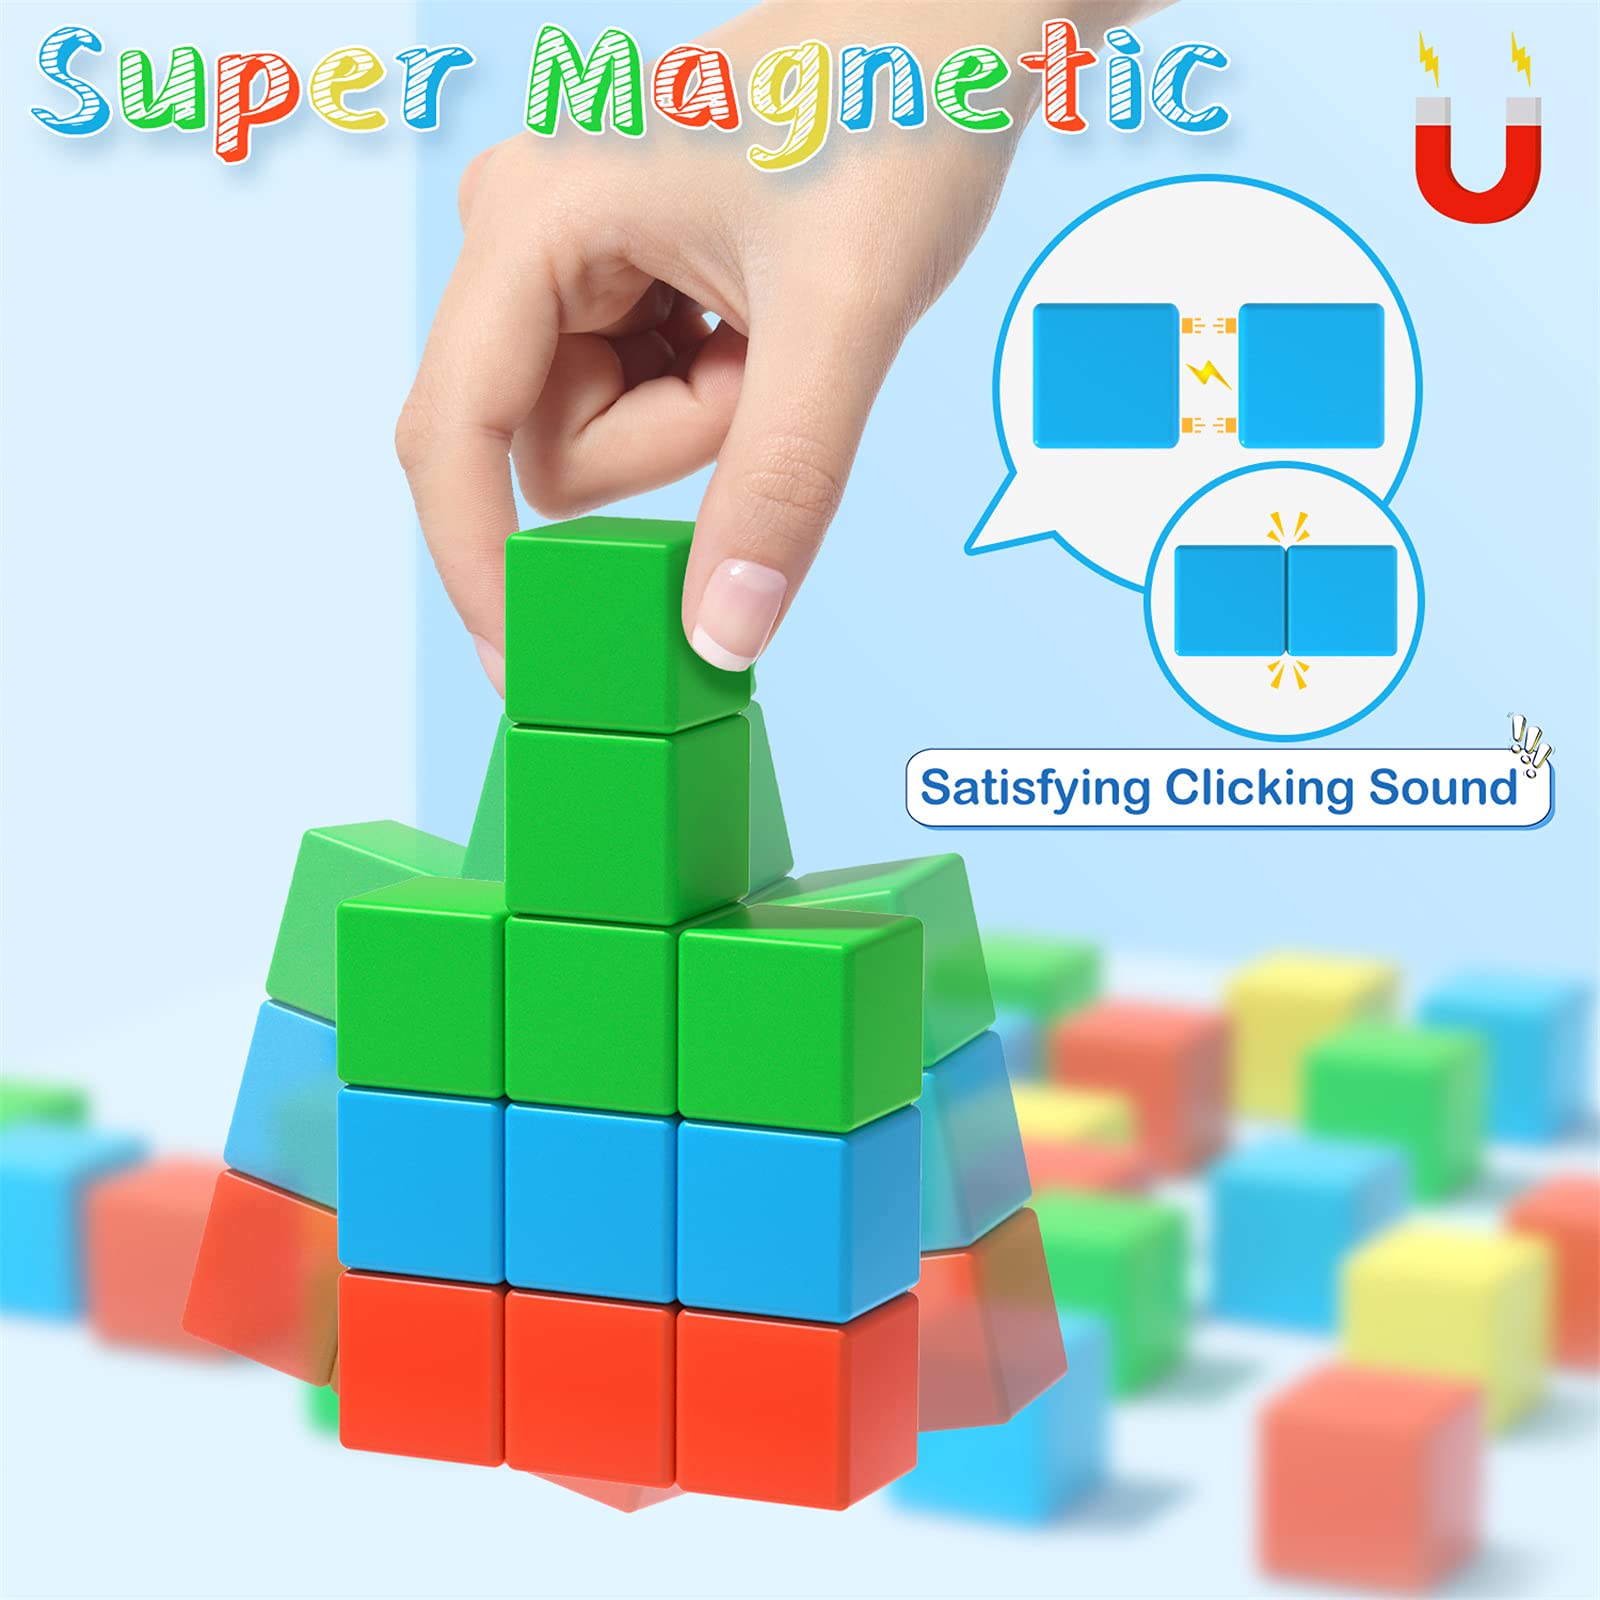 Magnetic Blocks, 28 Pieces 1.34 inch Large Magnetic Building Blocks, 3D Magnetic Cubes for Kids, Preschool Educational Construction Kit, Sensory Montessori Toys Kids Blocks for Boys Girls Toddlers